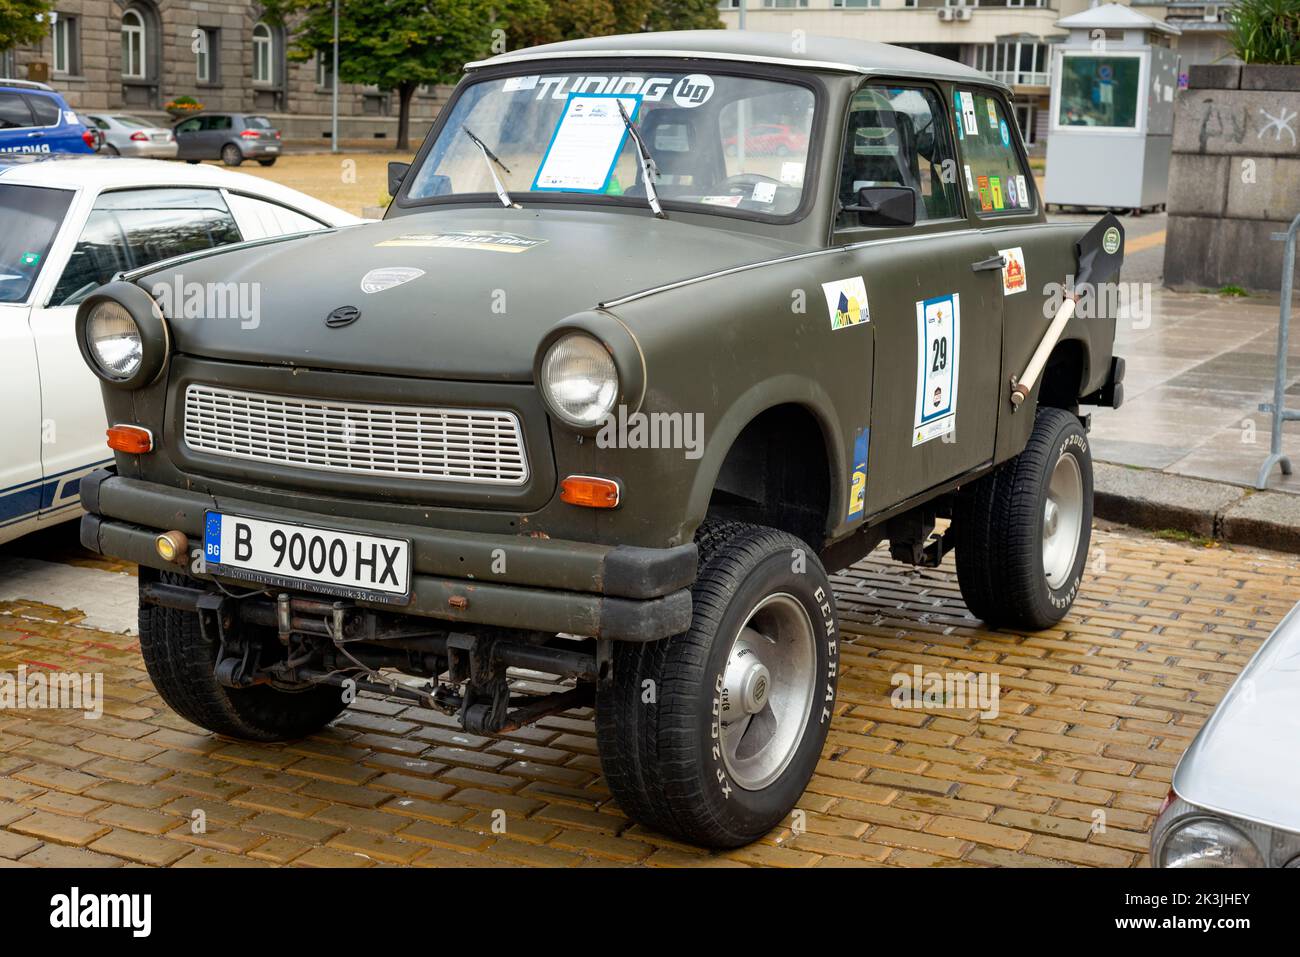 Trabant 601 4X4 German tuning car on display during the classic cars show and parade in Sofia, Bulgaria, Eastern Europe, Balkans, EU Stock Photo